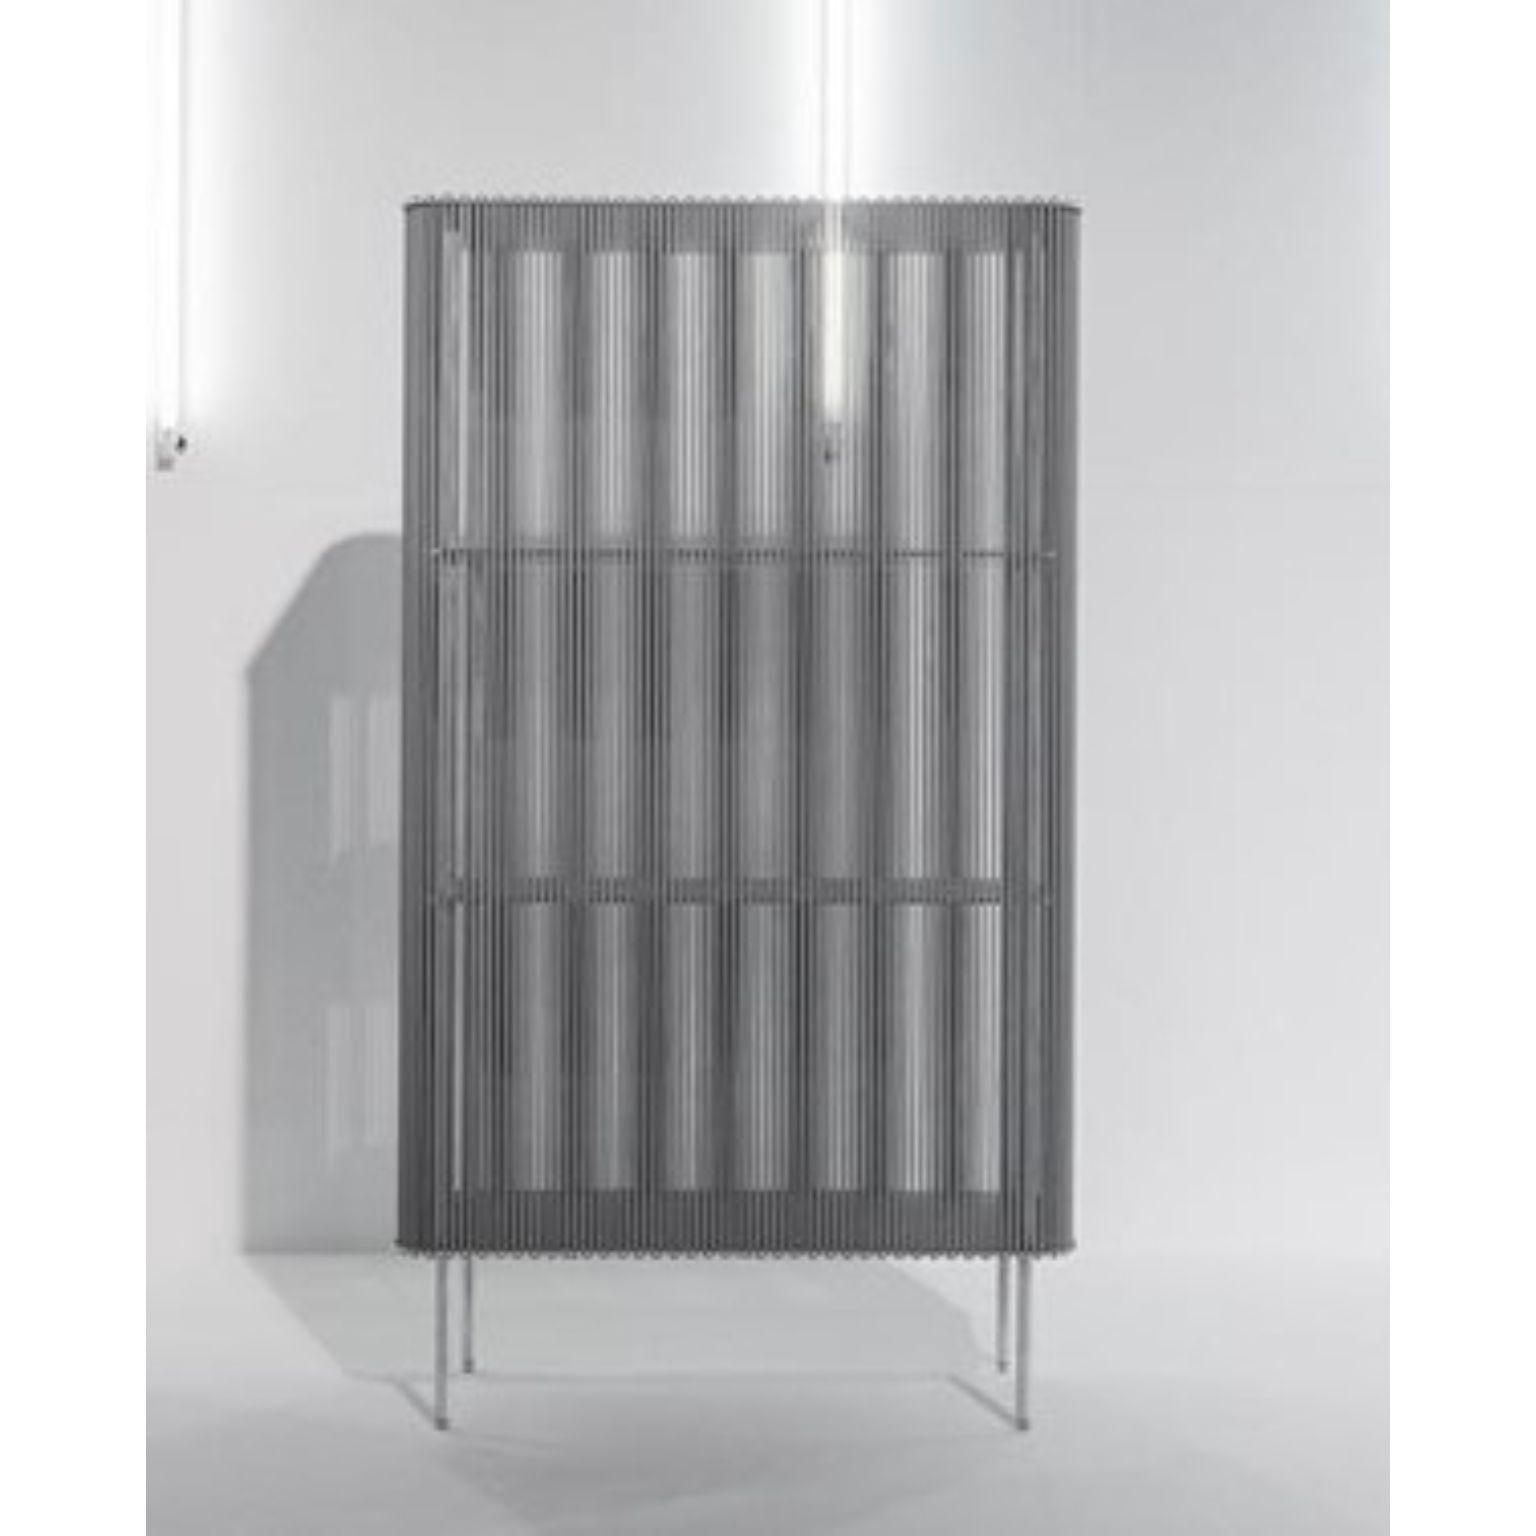 Coil #3 low cabinet by Bram Kerkhofs
Dimensions: D80 x W40 x H144.5 cm
Materials: Stainless steel, aluminum, elastic rope (natural rubber, polyethylene).

Other dimensions are available.

Coil is a modular cabinet system in which the ‘shell’